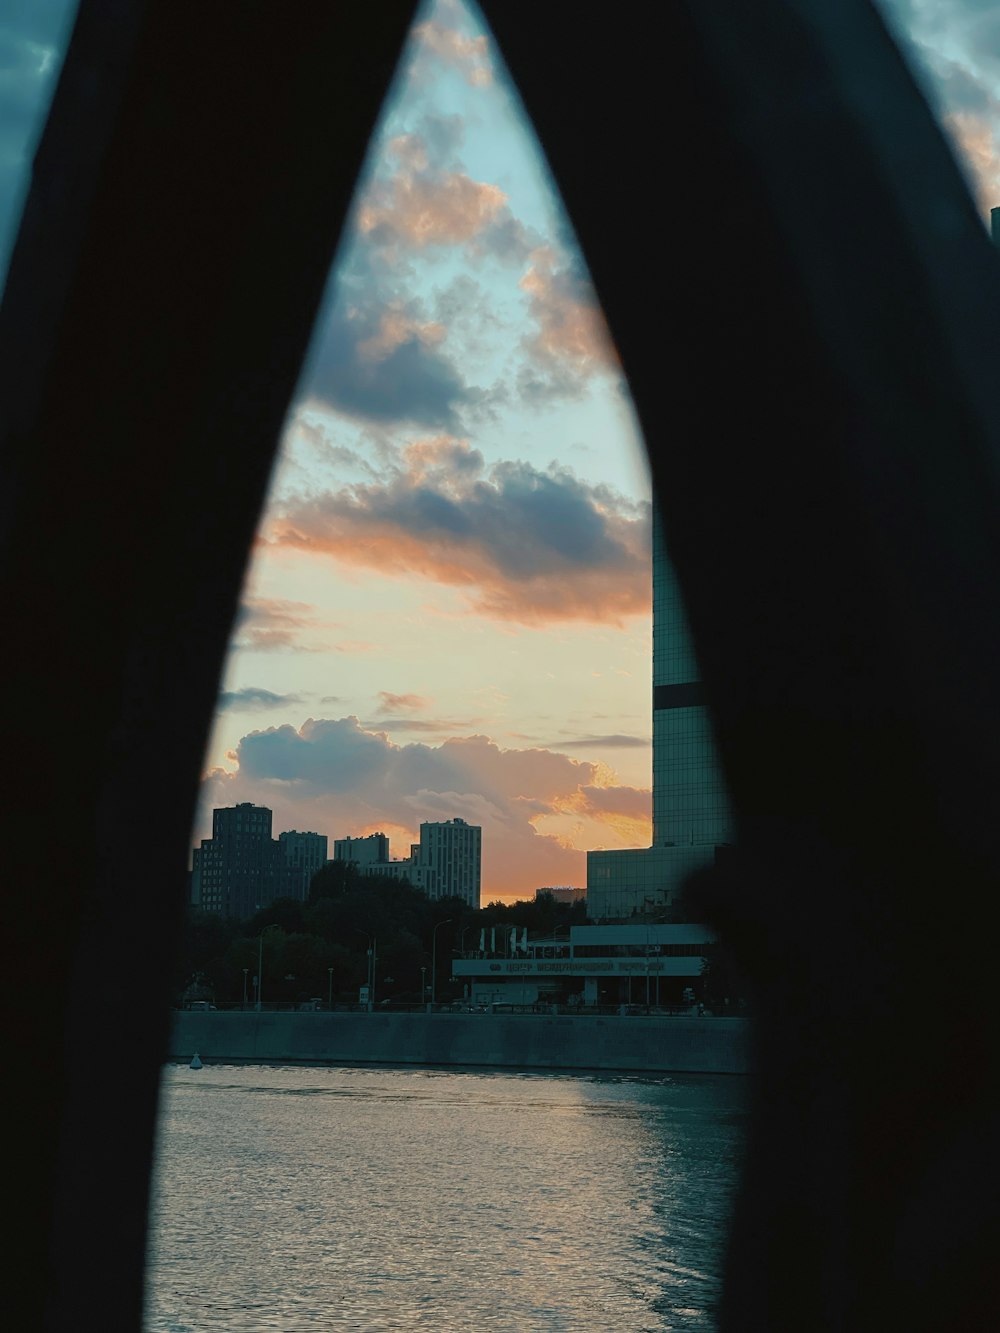 silhouette of city buildings near body of water during sunset